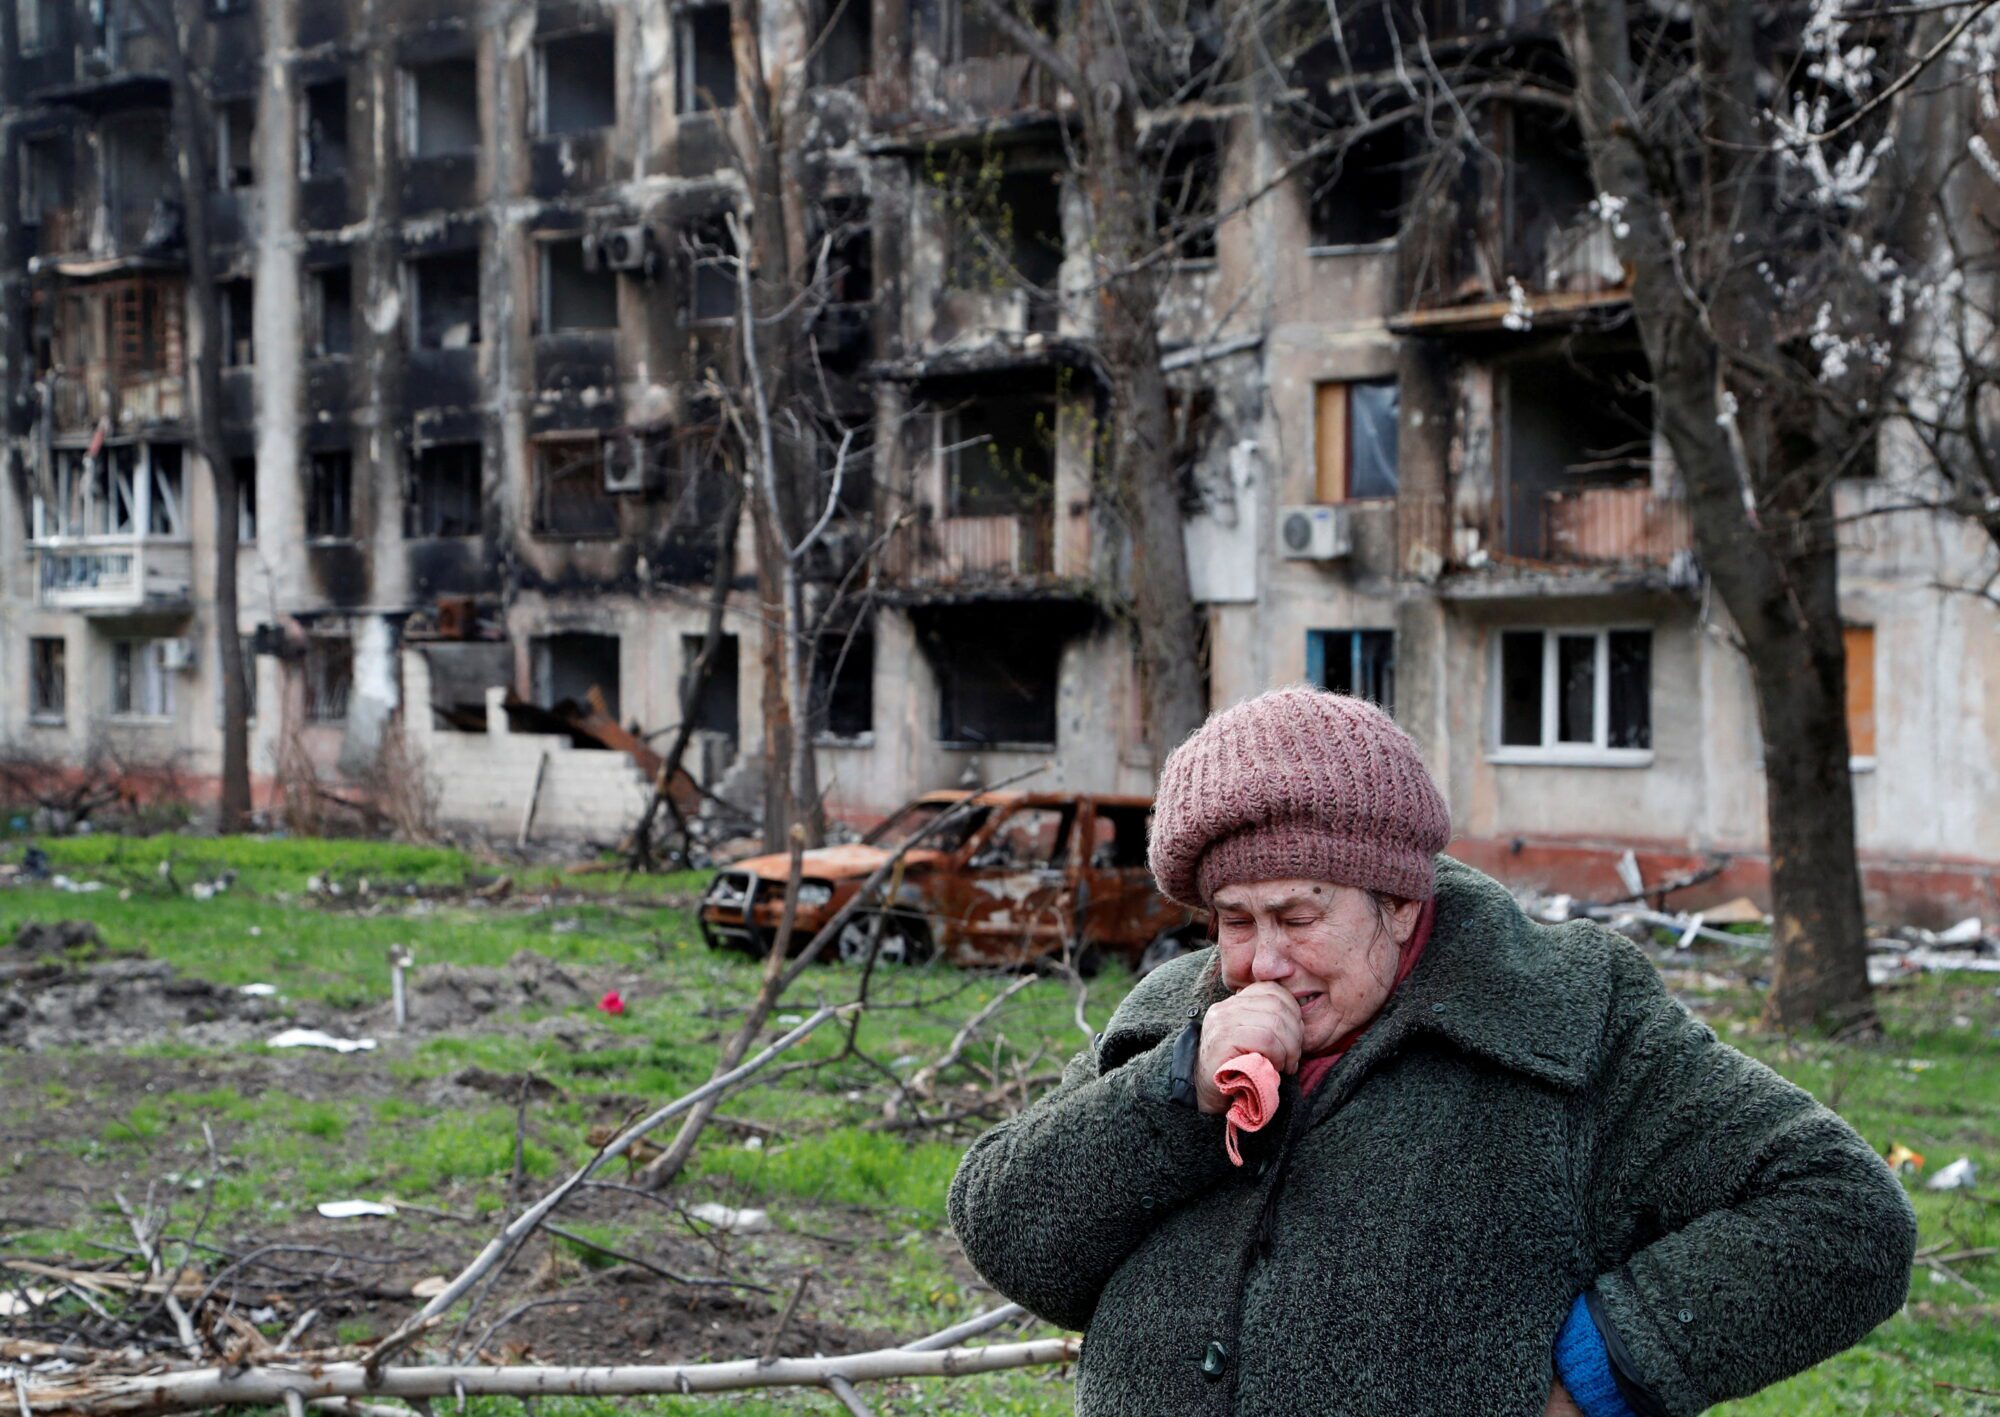 Local resident Tamara cries in front of a destroyed apartment building in Mariupol